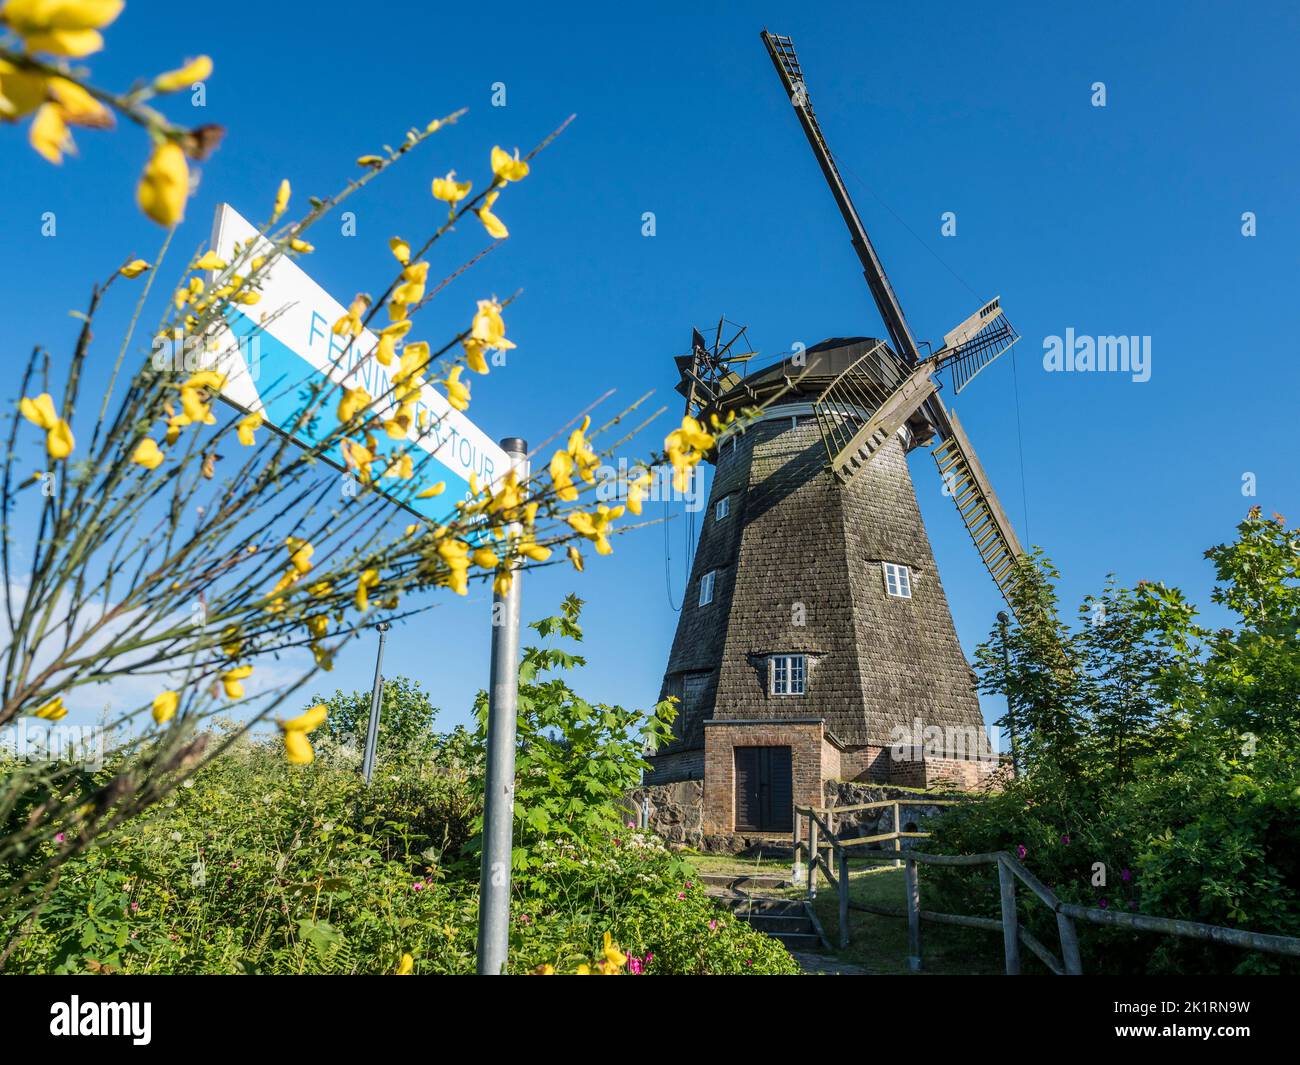 Windmill in Benz, a stop on the Feininger bicycle tour, island Usedom, Mecklenburg, Germany Stock Photo